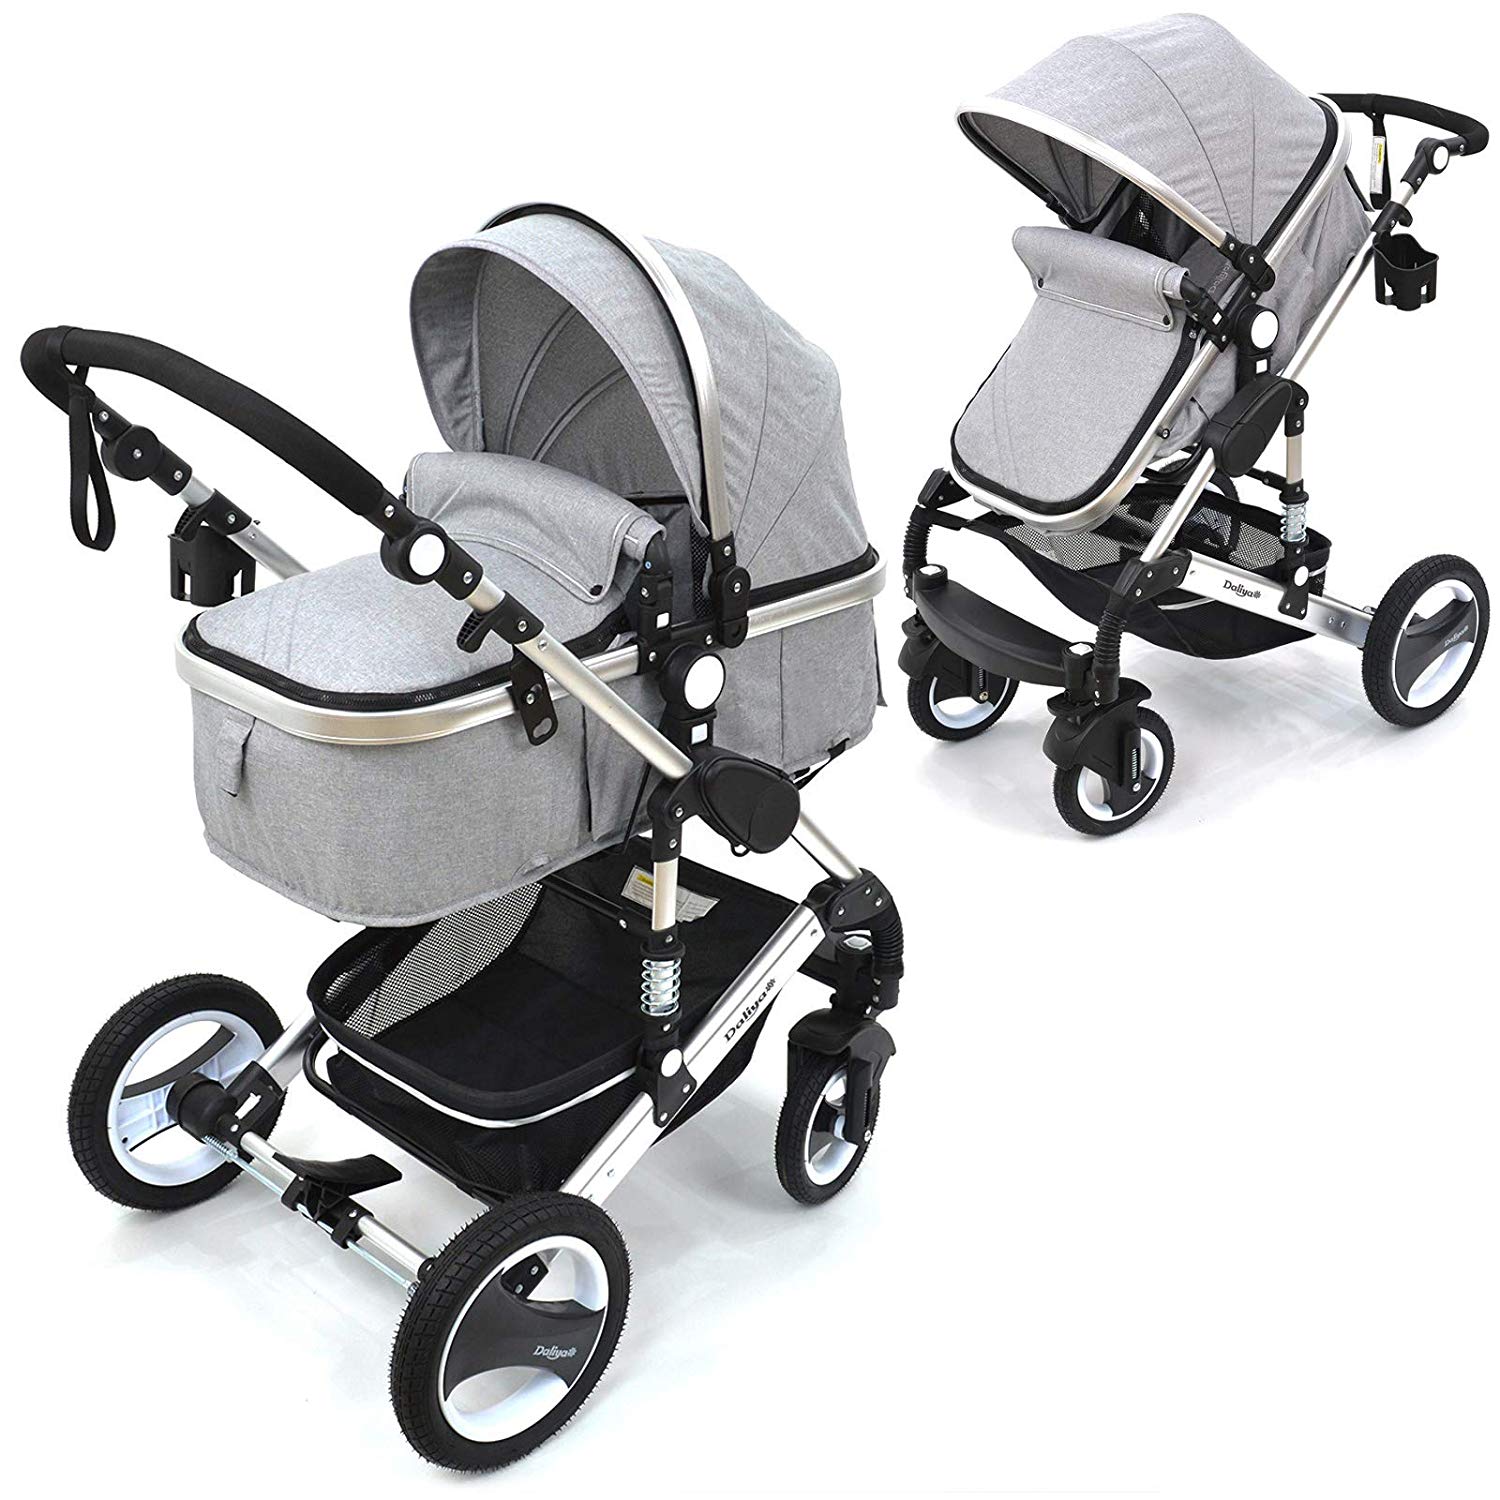 Combi pram 2-in-1 Bambimo with aluminium frame in many different colours – click system – all 4 wheels to remove – with extra large shopping basket – 2 in 1 sports seat – baby bath space saving xl